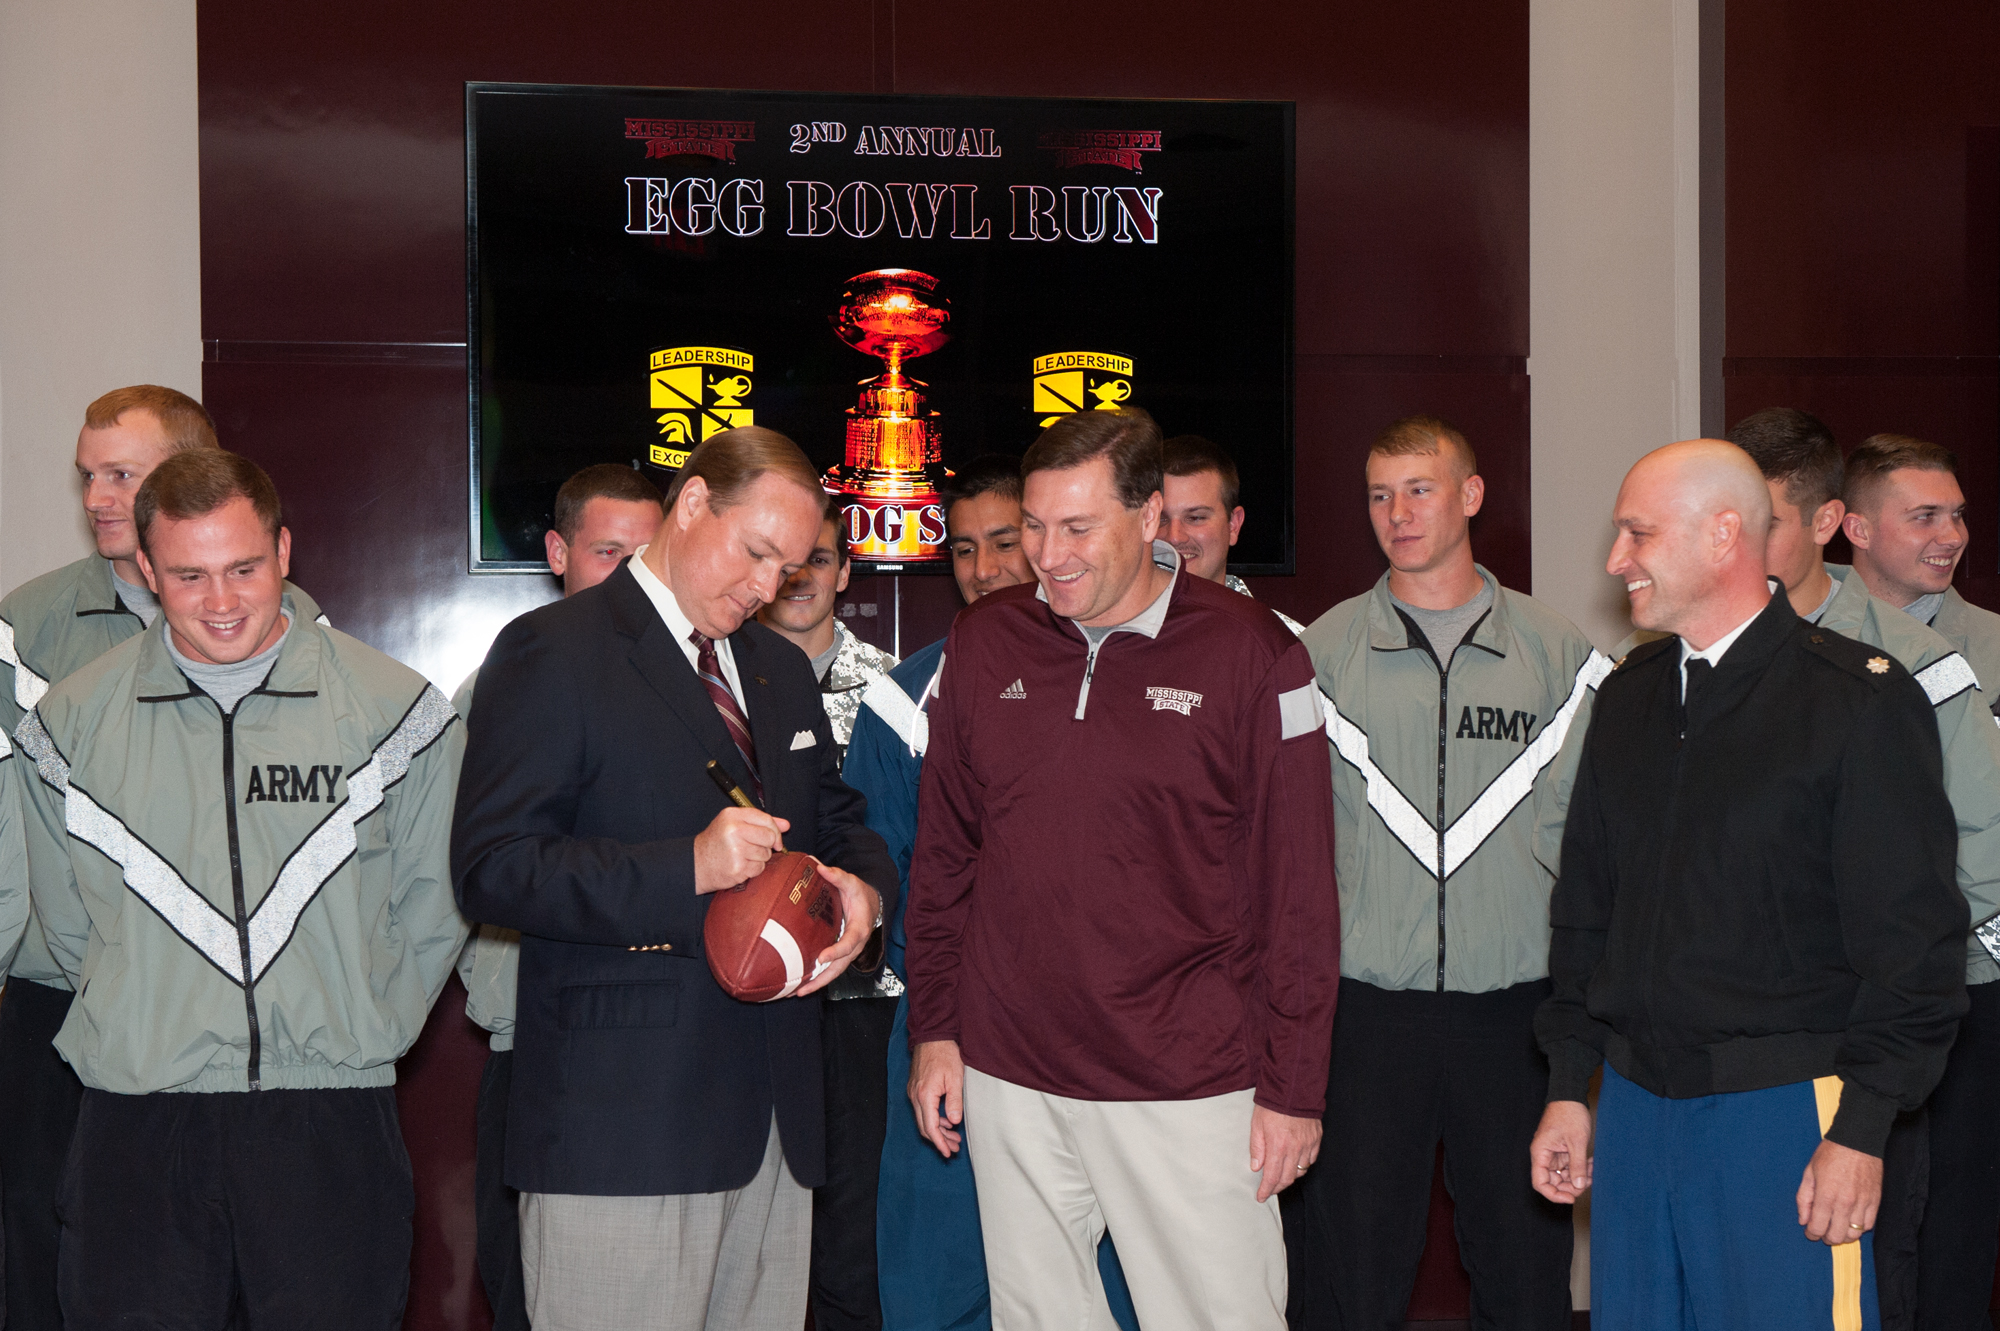 MSU President Mark E. Keenum, front left, head football coach Dan Mullen and Lt. Col. Brian Locke, the university's professor of military science and battalion commander, take turns signing the football that Army and Air Force ROTC cadets from MSU and Ole Miss will carry during Monday's second Egg Bowl Run.